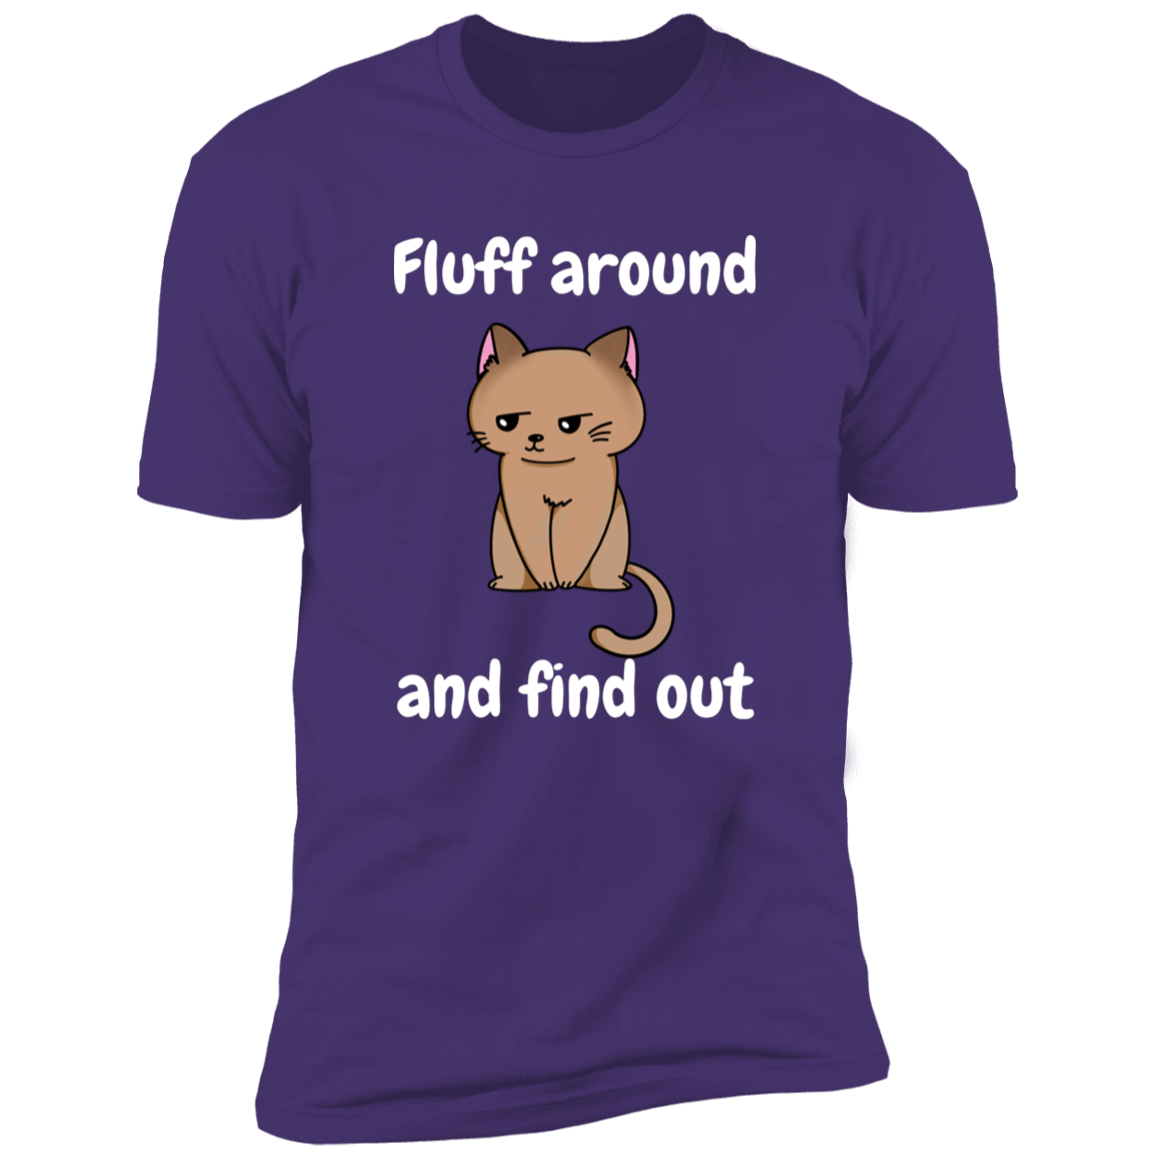 Fluff Around and Find Out Cat Shirt, funny cat shirt, funny cat shirt for humans, in purple rush